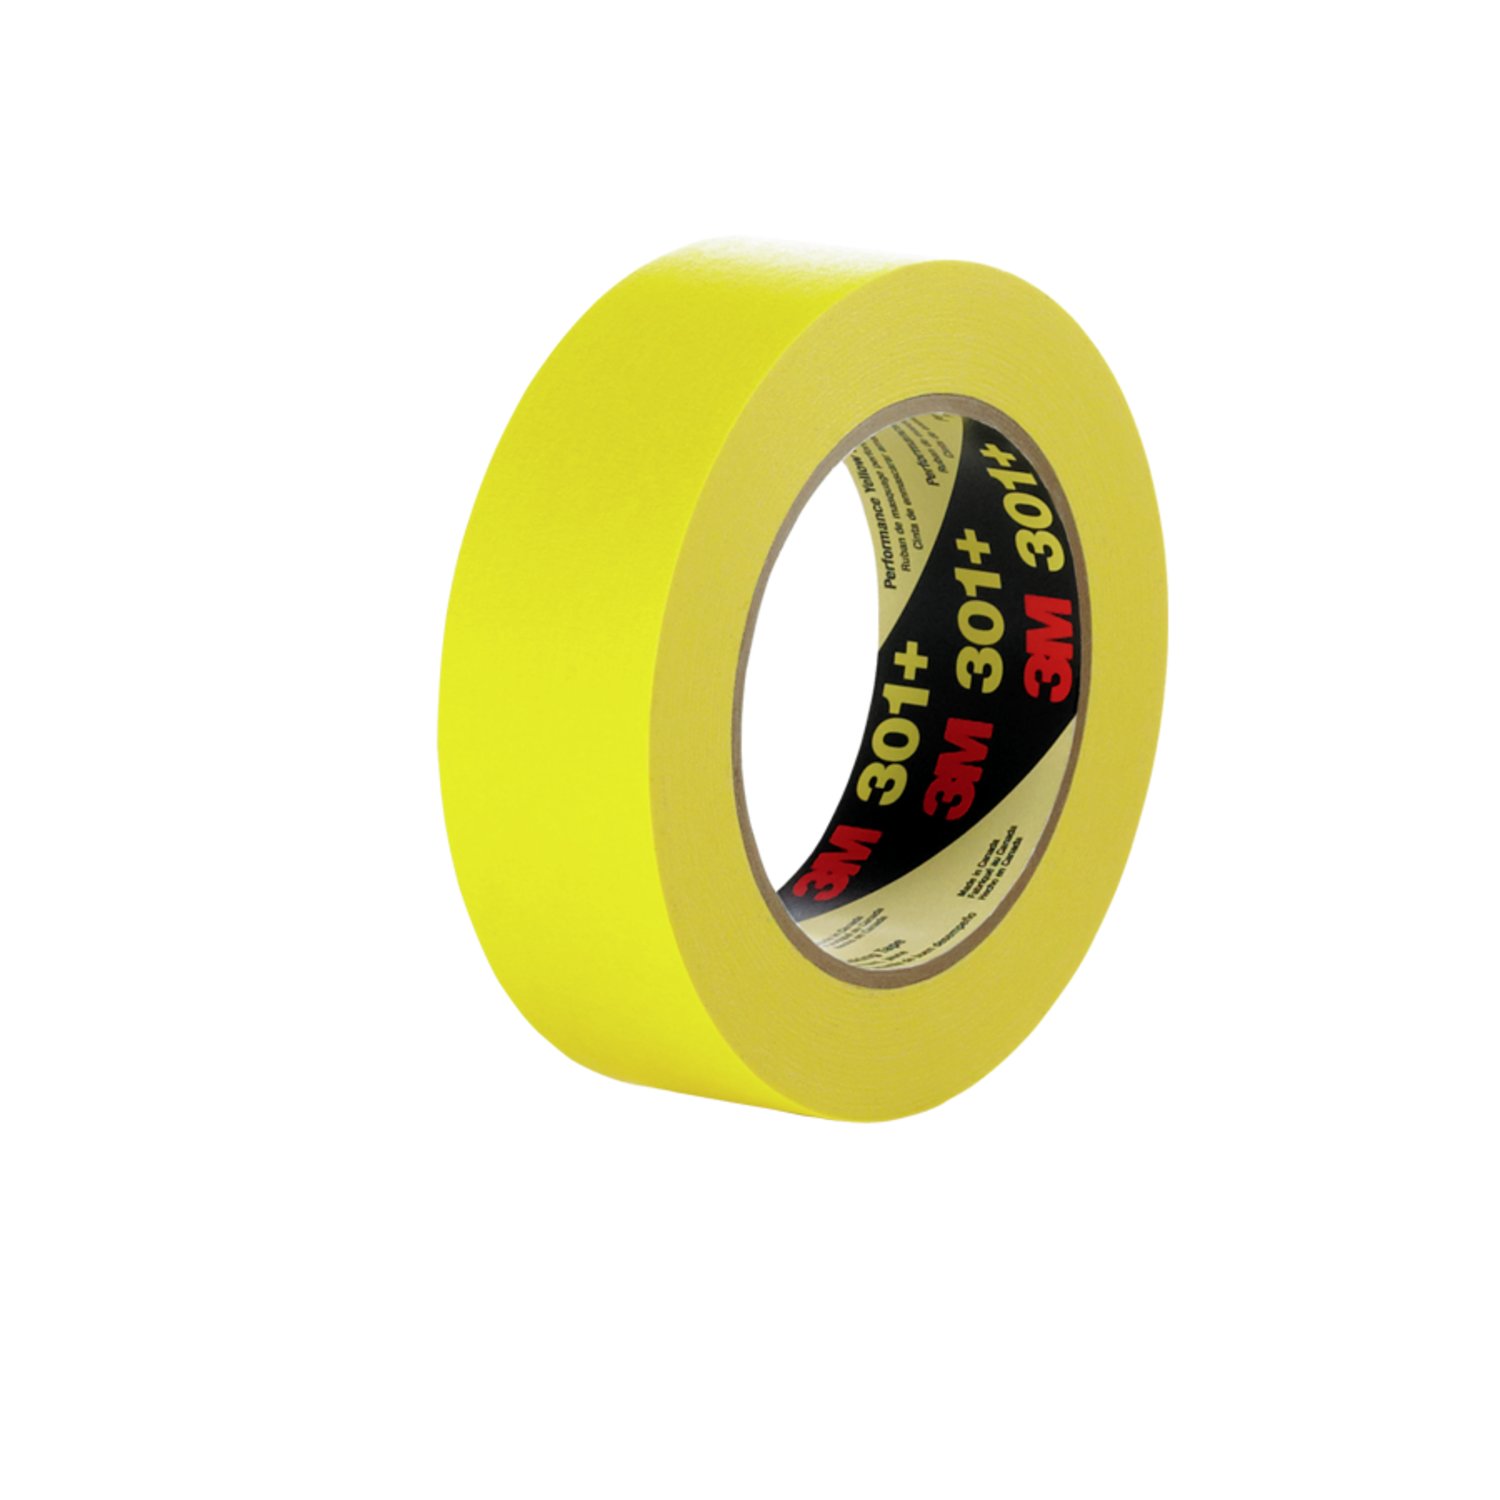 7000124887 - 3M Performance Yellow Masking Tape 301+, 12 mm x 55 m, 6.3 mil, 72
Roll/Case